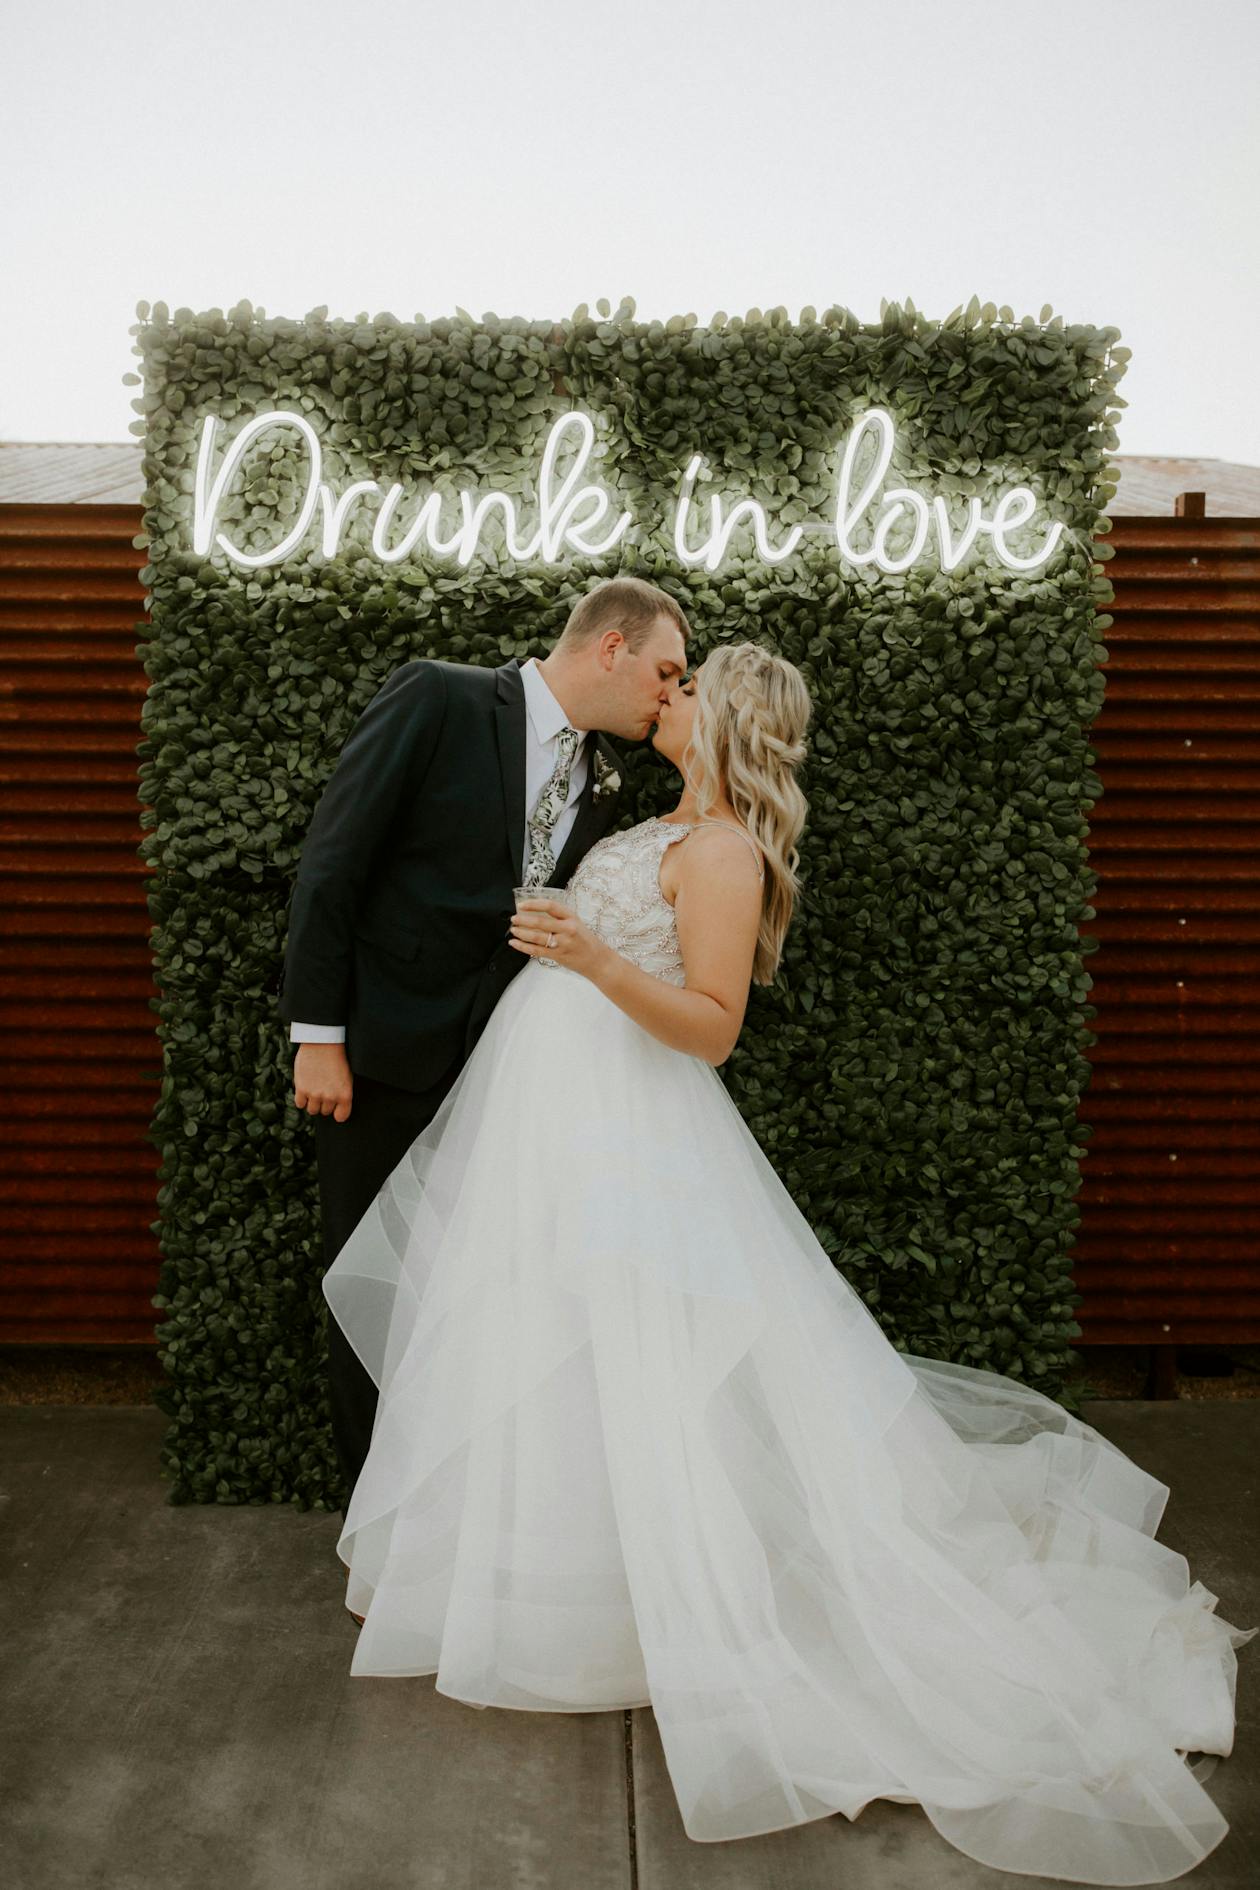 Drunk In Love Neon Sign on Greenery Wall with Couple Posing In front | PartySlate